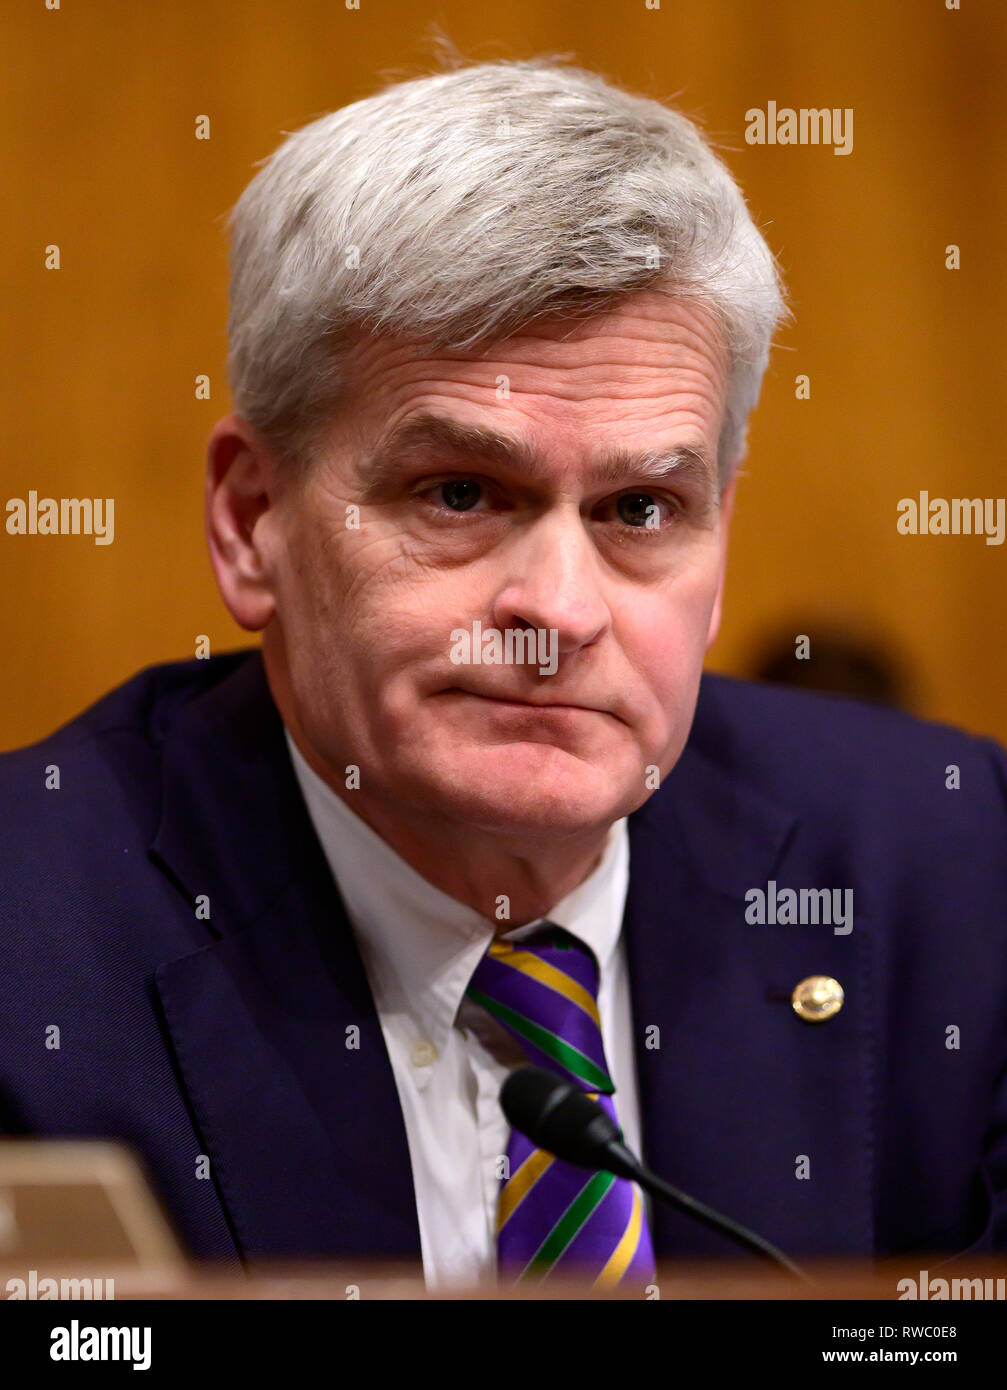 Washington, United States Of America. 05th Mar, 2019. United States Senator Bill Cassidy (Republican of Louisiana) presides during the United States Senate Committee on Health, Education, Labor and Pensions Committee hearing on 'Vaccines Save Lives: What Is Driving Preventable Disease Outbreaks?' on Capitol Hill in Washington, DC on Tuesday, March 5, 2018. Credit: Ron Sachs/CNP | usage worldwide Credit: dpa/Alamy Live News Stock Photo